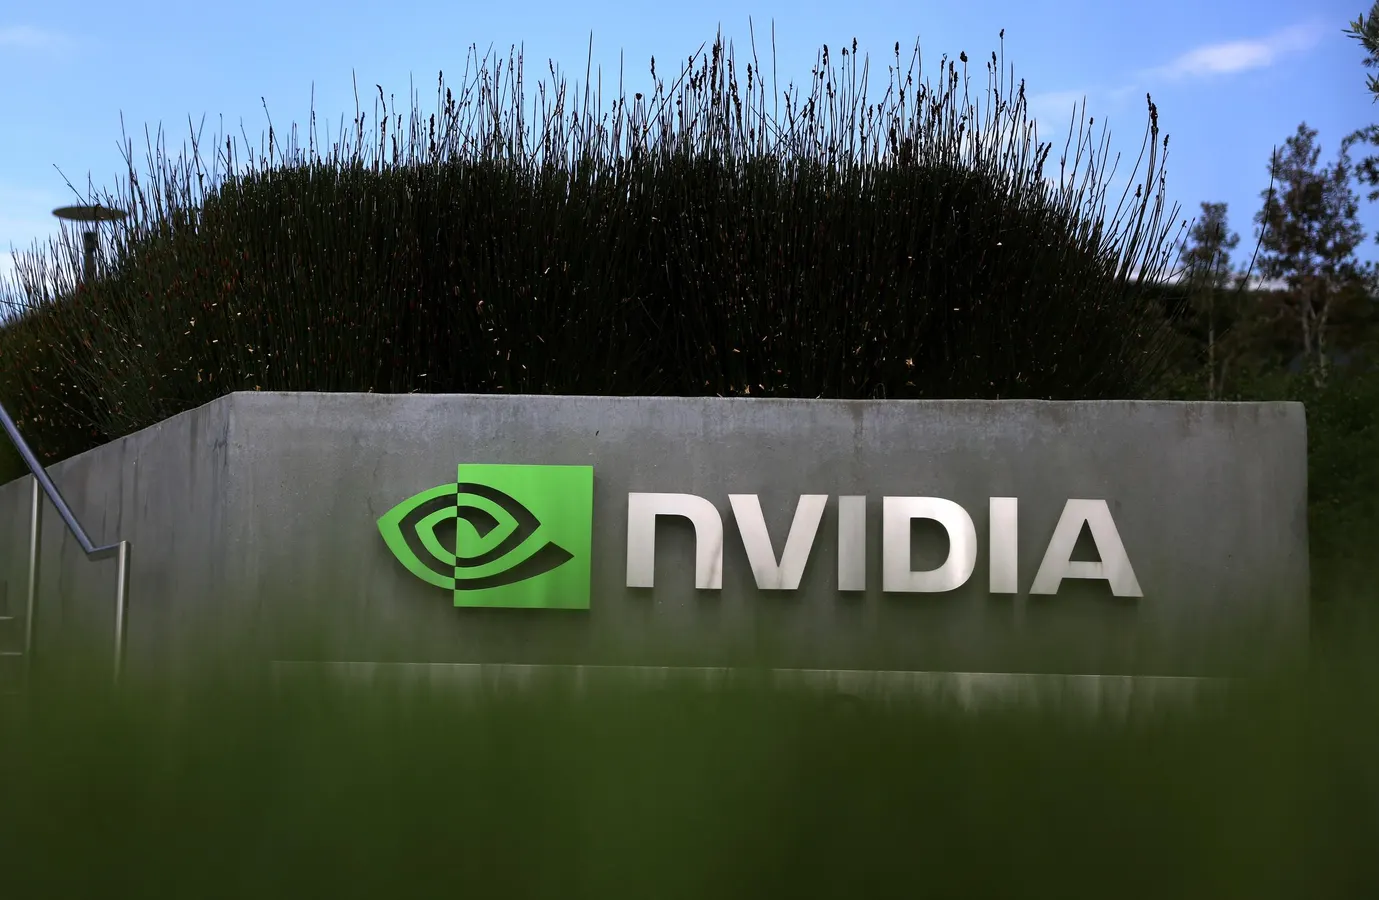 Can Nvidia Beat The Target?